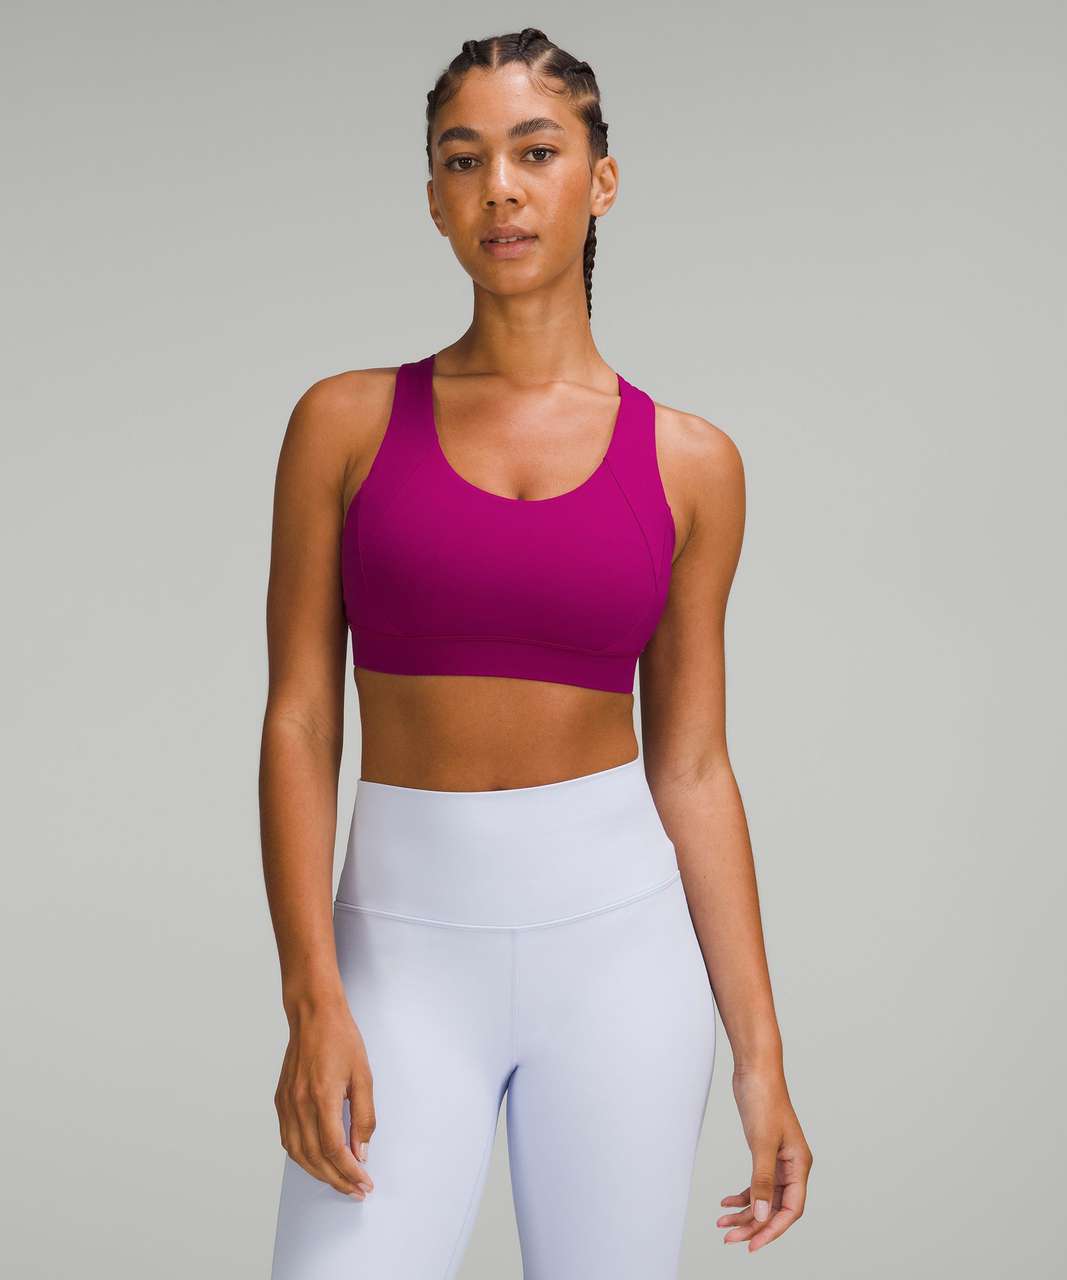 Lululemon Free to Be Elevated Bra *Light Support, DD/DDD(E) Cup - Magenta Purple